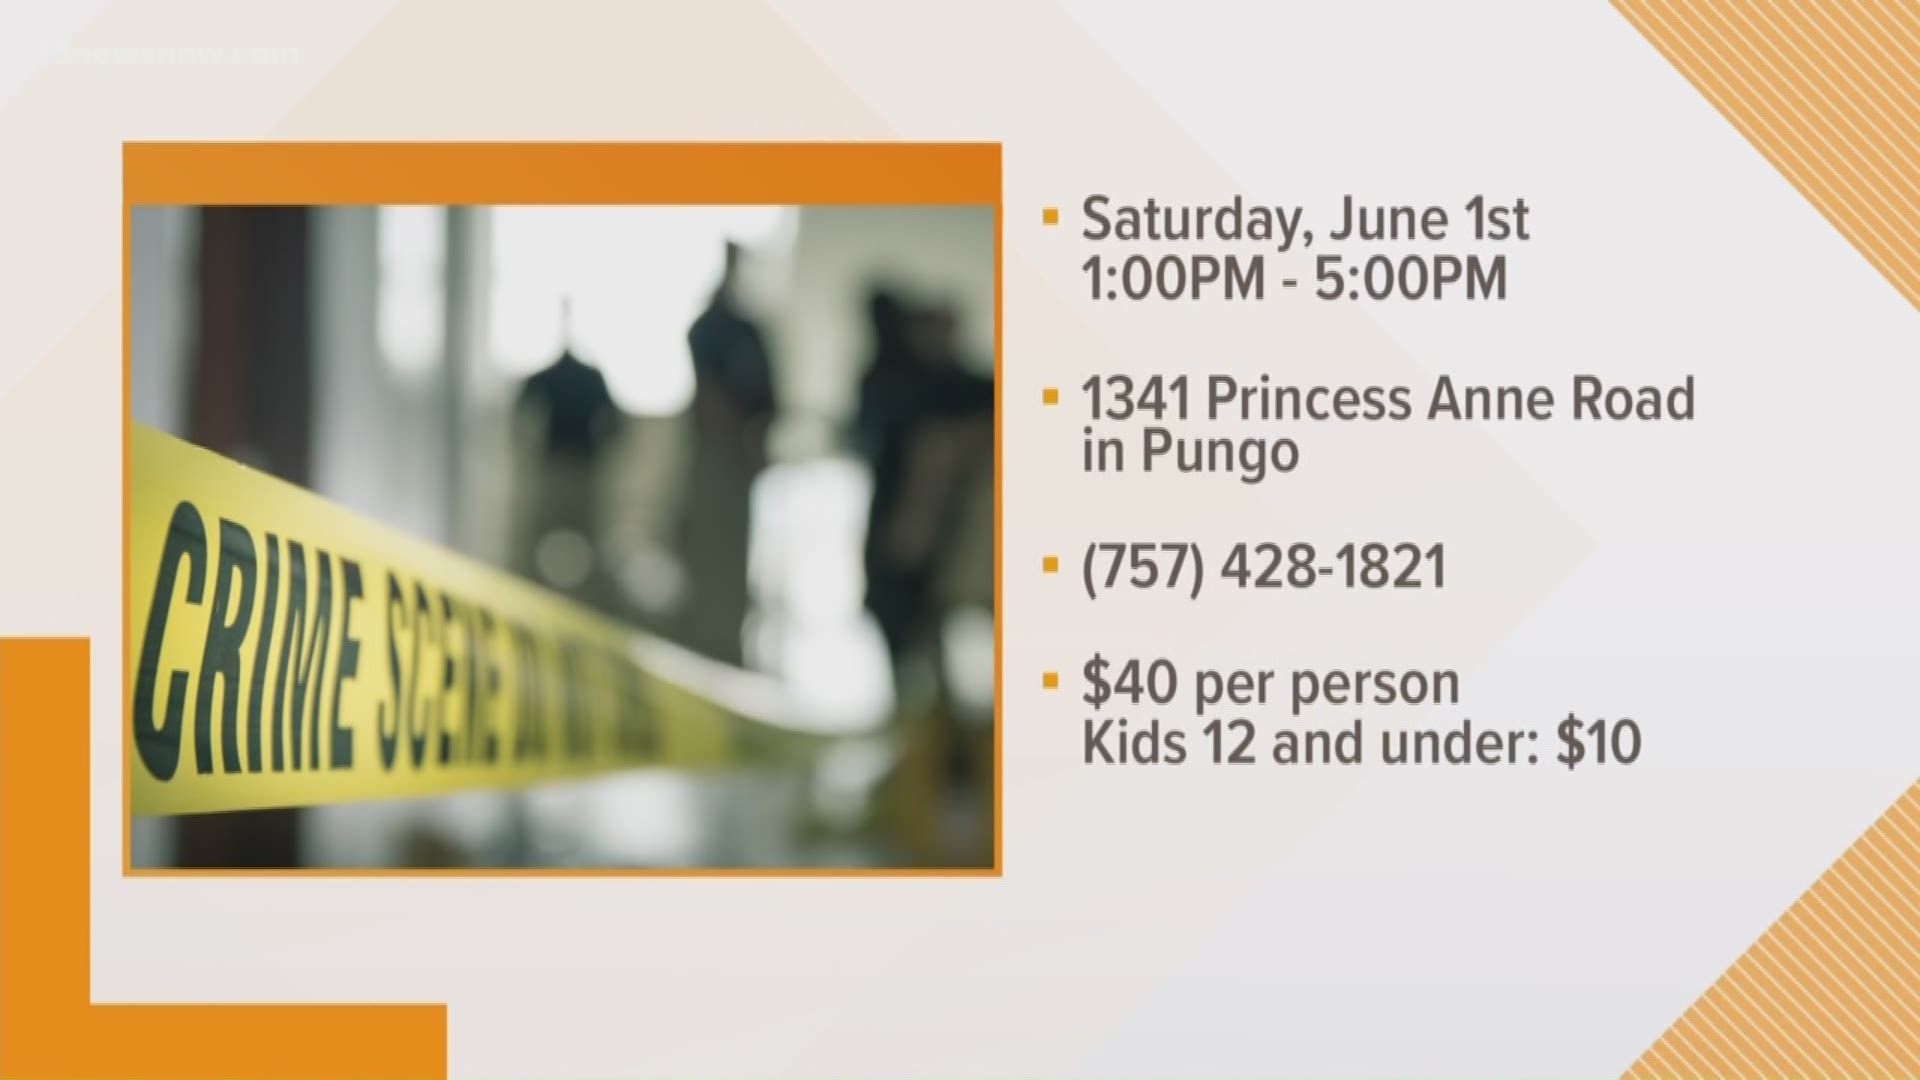 The 13th annual Virginia Beach Crime Solvers Pig Pickin' and Family Fun Day will be held Saturday, June 1 from 1 to 5 p.m.